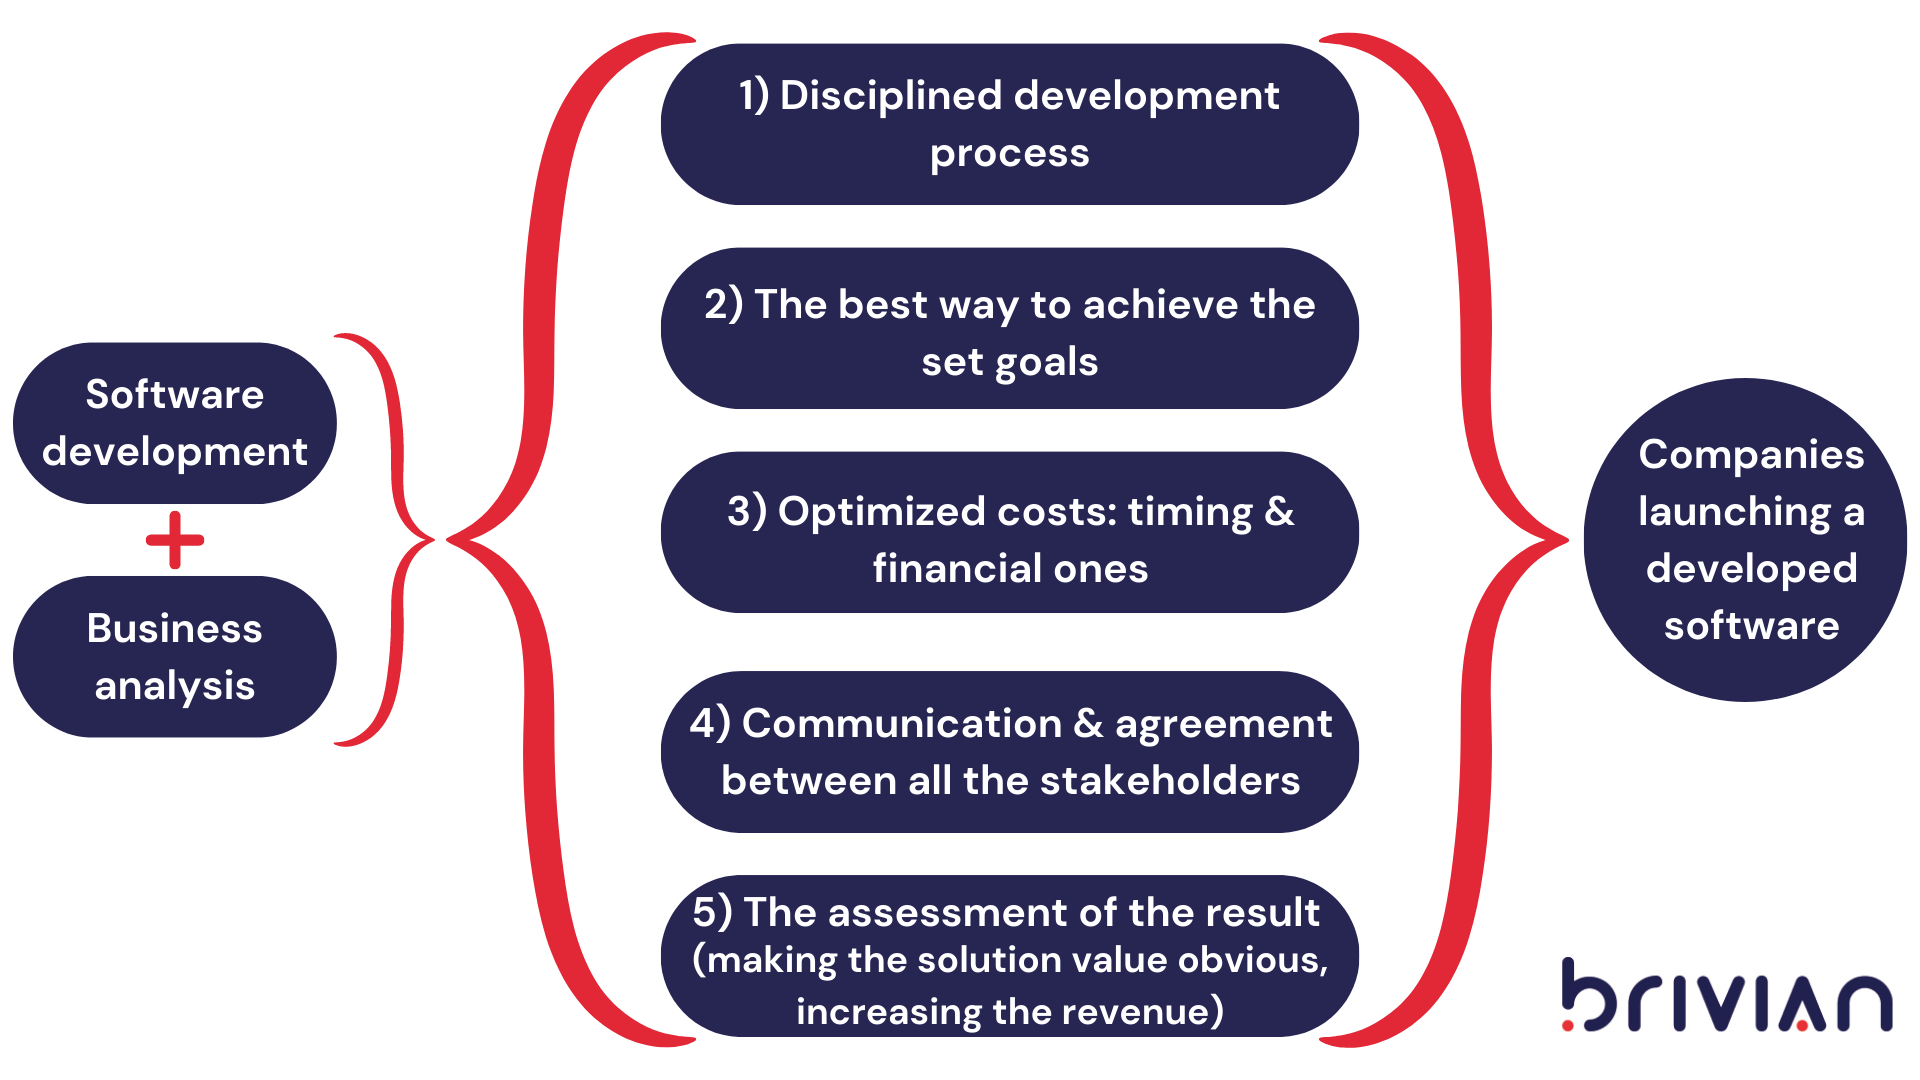 The benefits for a company from the business analysis process in software development